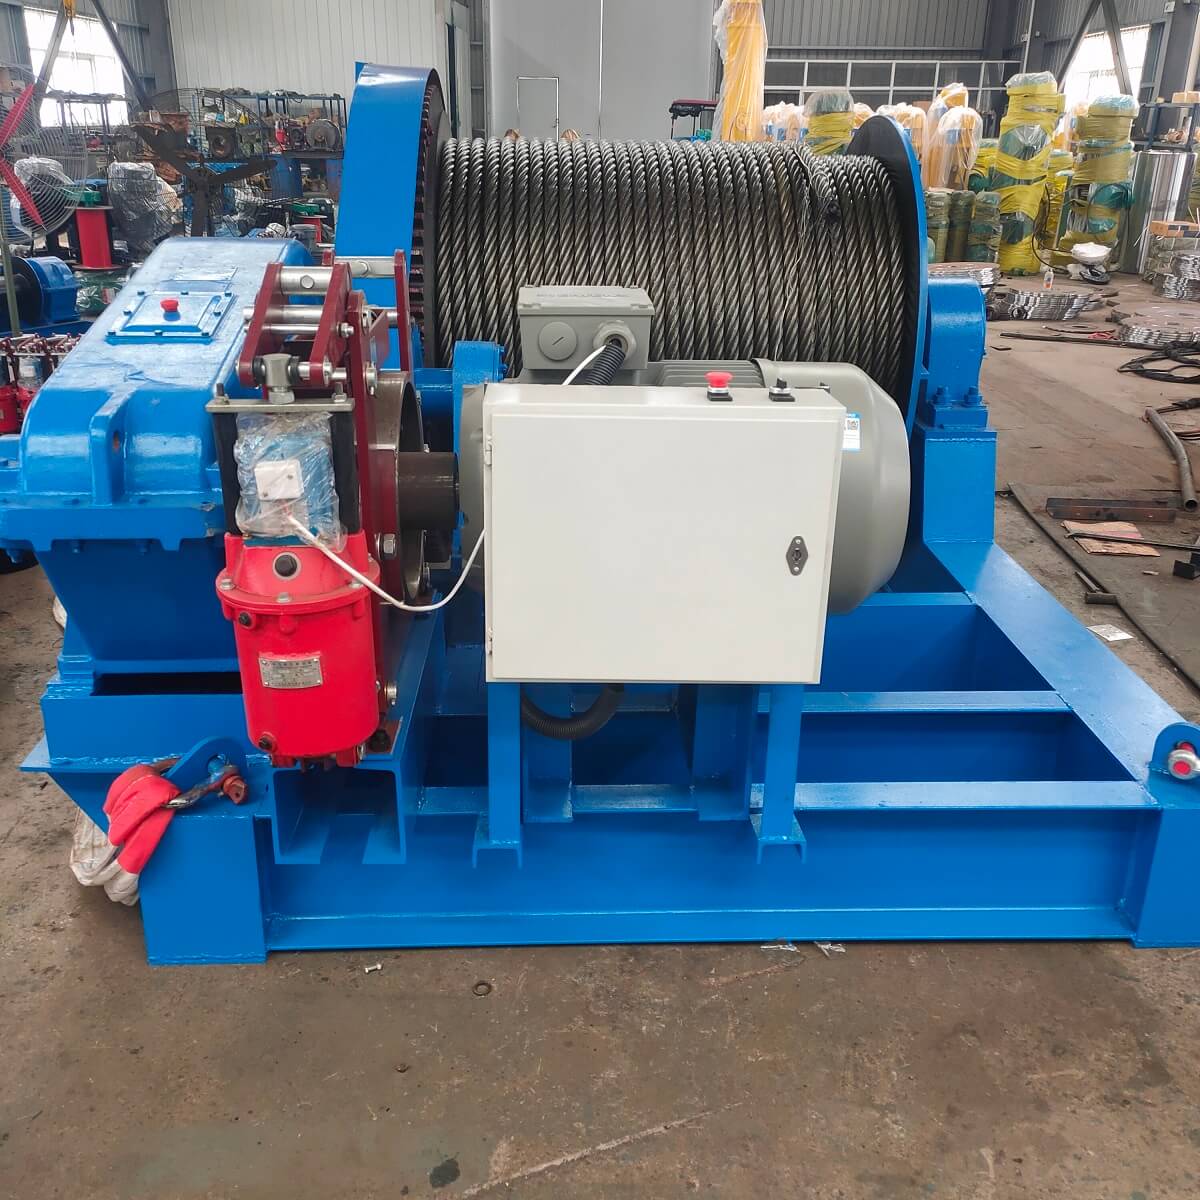 Site photos of 16 ton Building Electric Winch (Pulling cable winch)-4.jpg